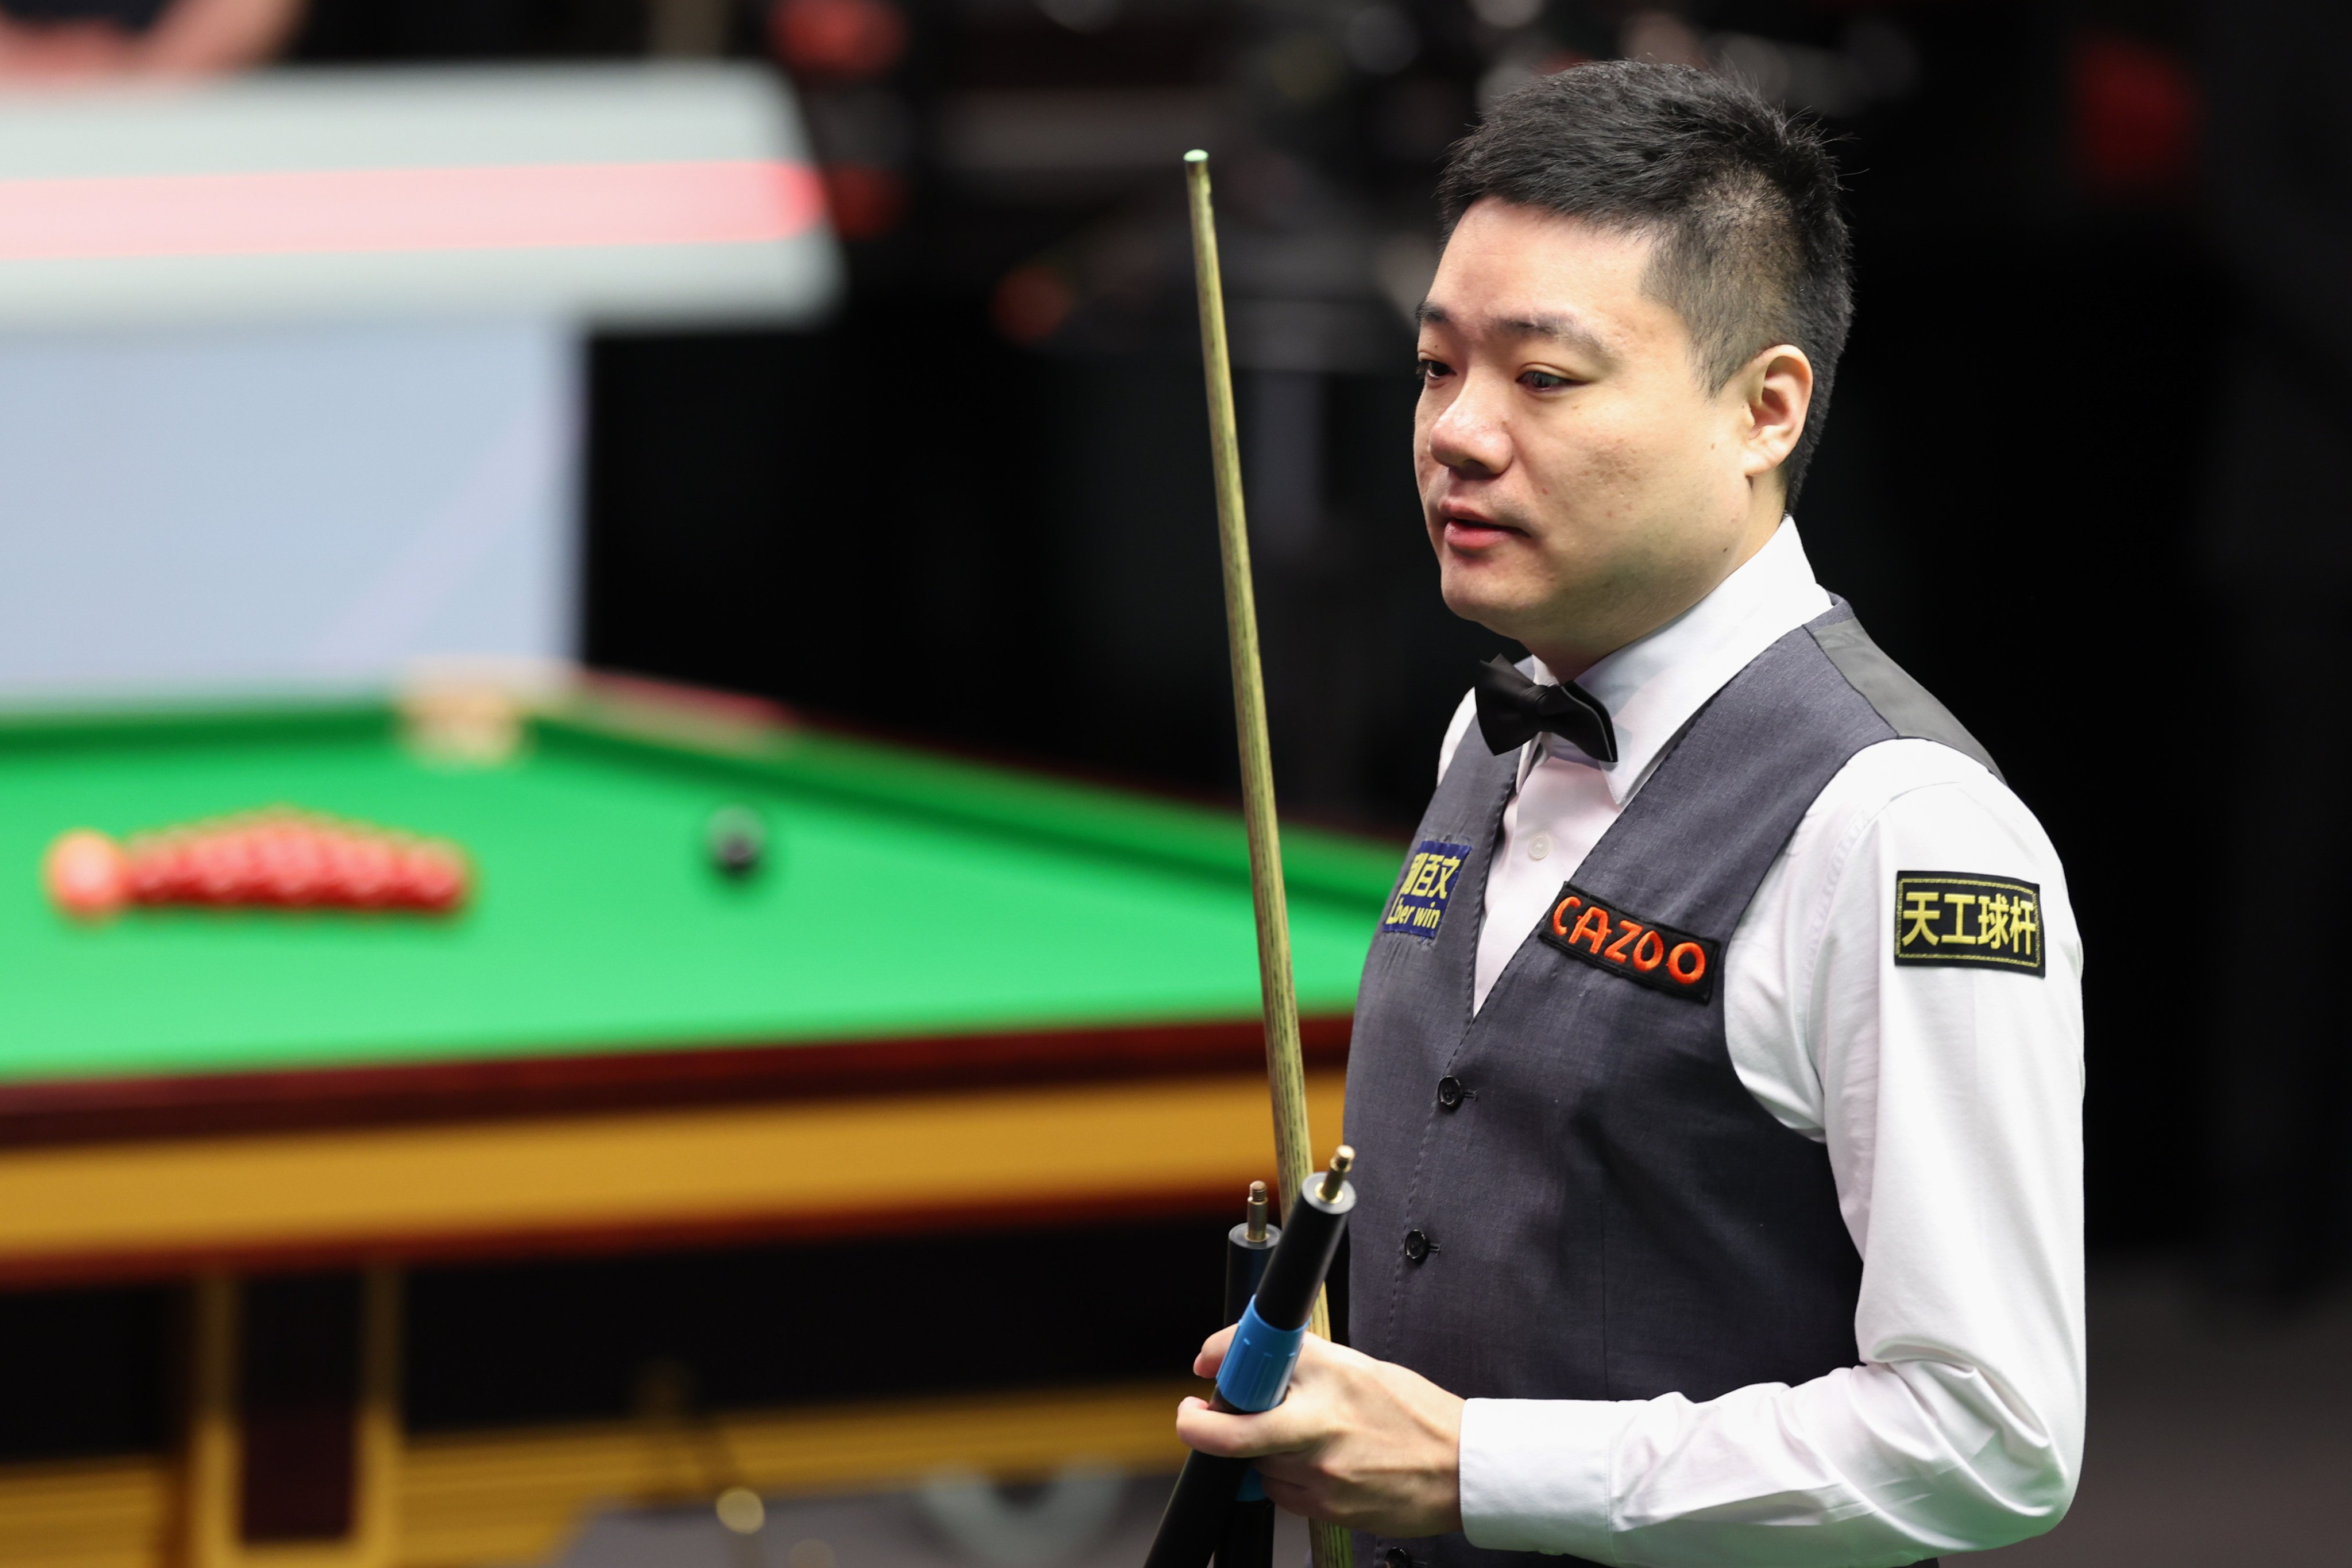 Ding Junhui wants to see a better balance between snooker practice and education. Photo: Xinhua